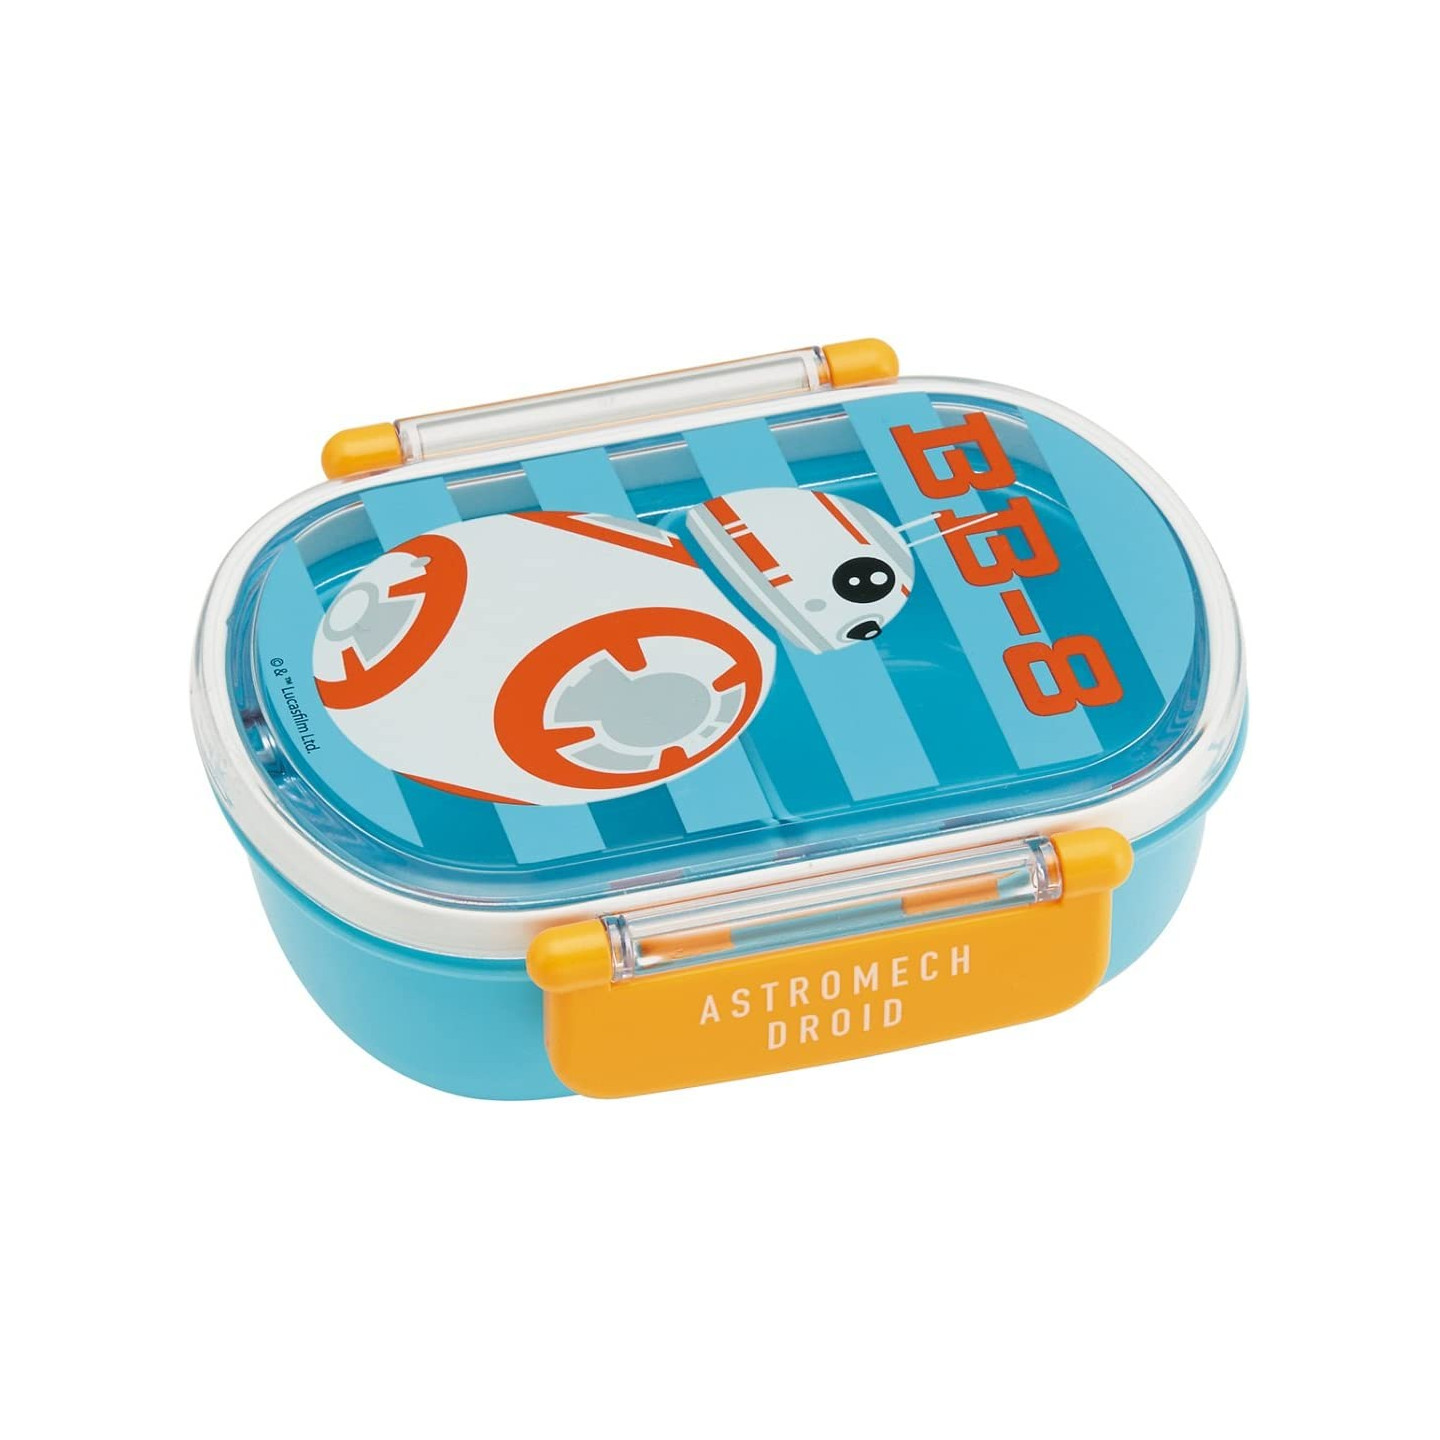 Star Wars Lunch Box  Bento recipes, Bento box lunch for kids, Bento lunch